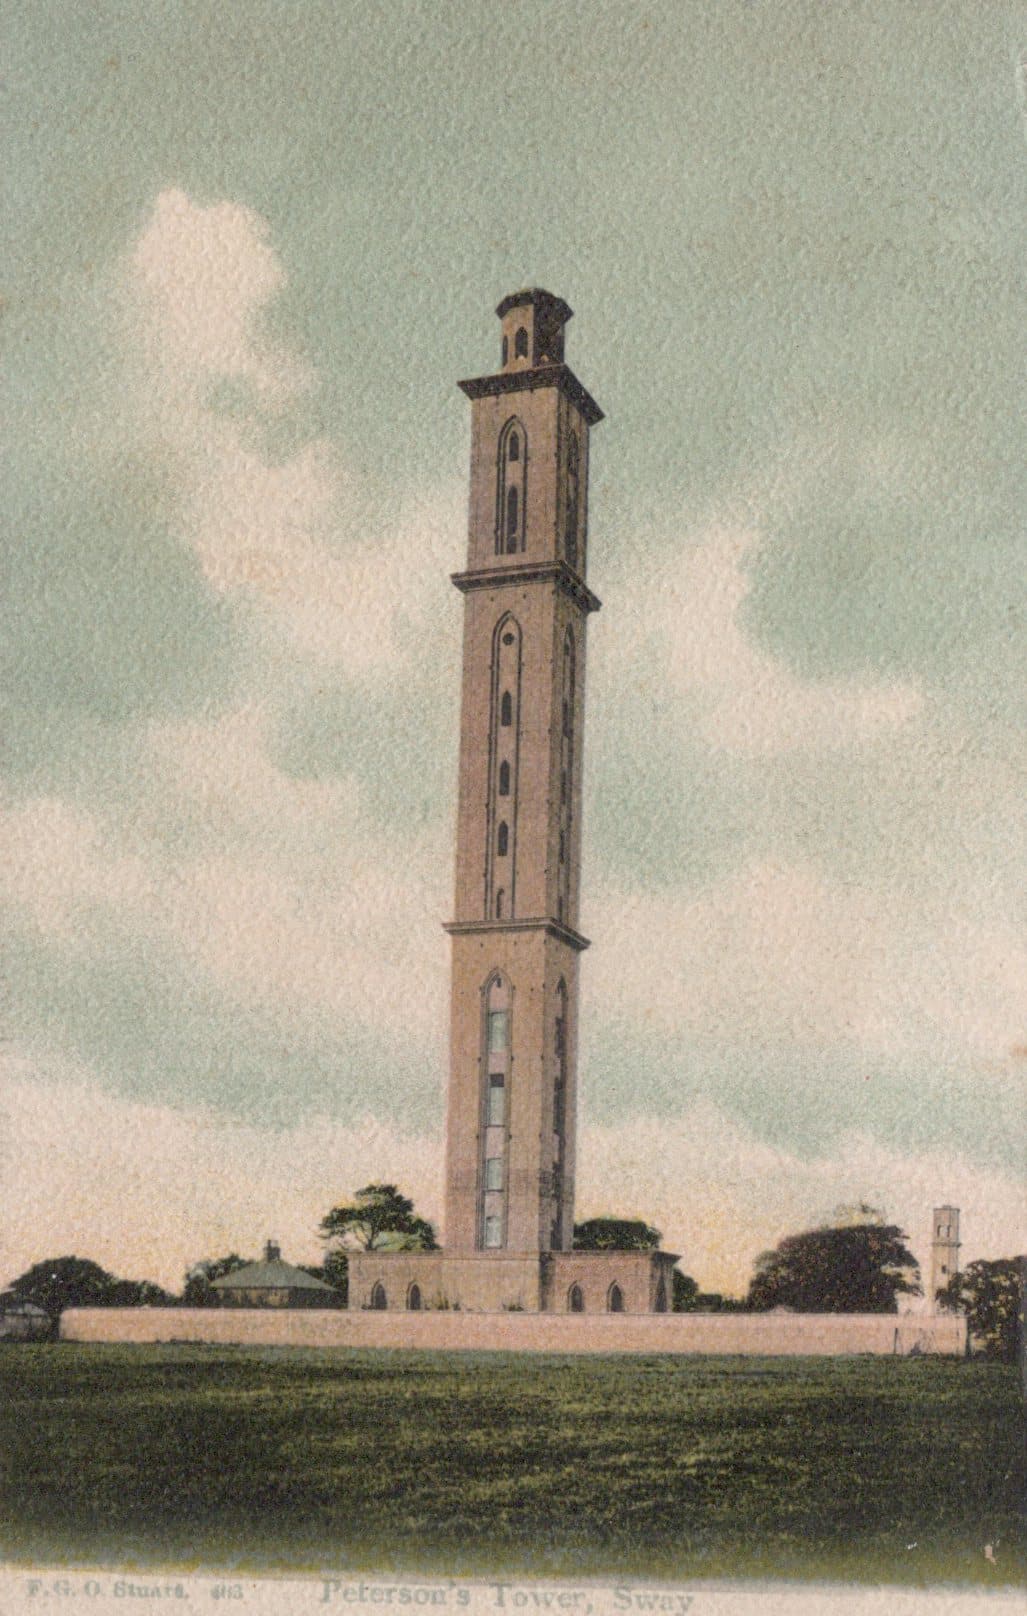 Hampshire Postcard - Peterson's Tower, Sway - Mo’s Postcards 